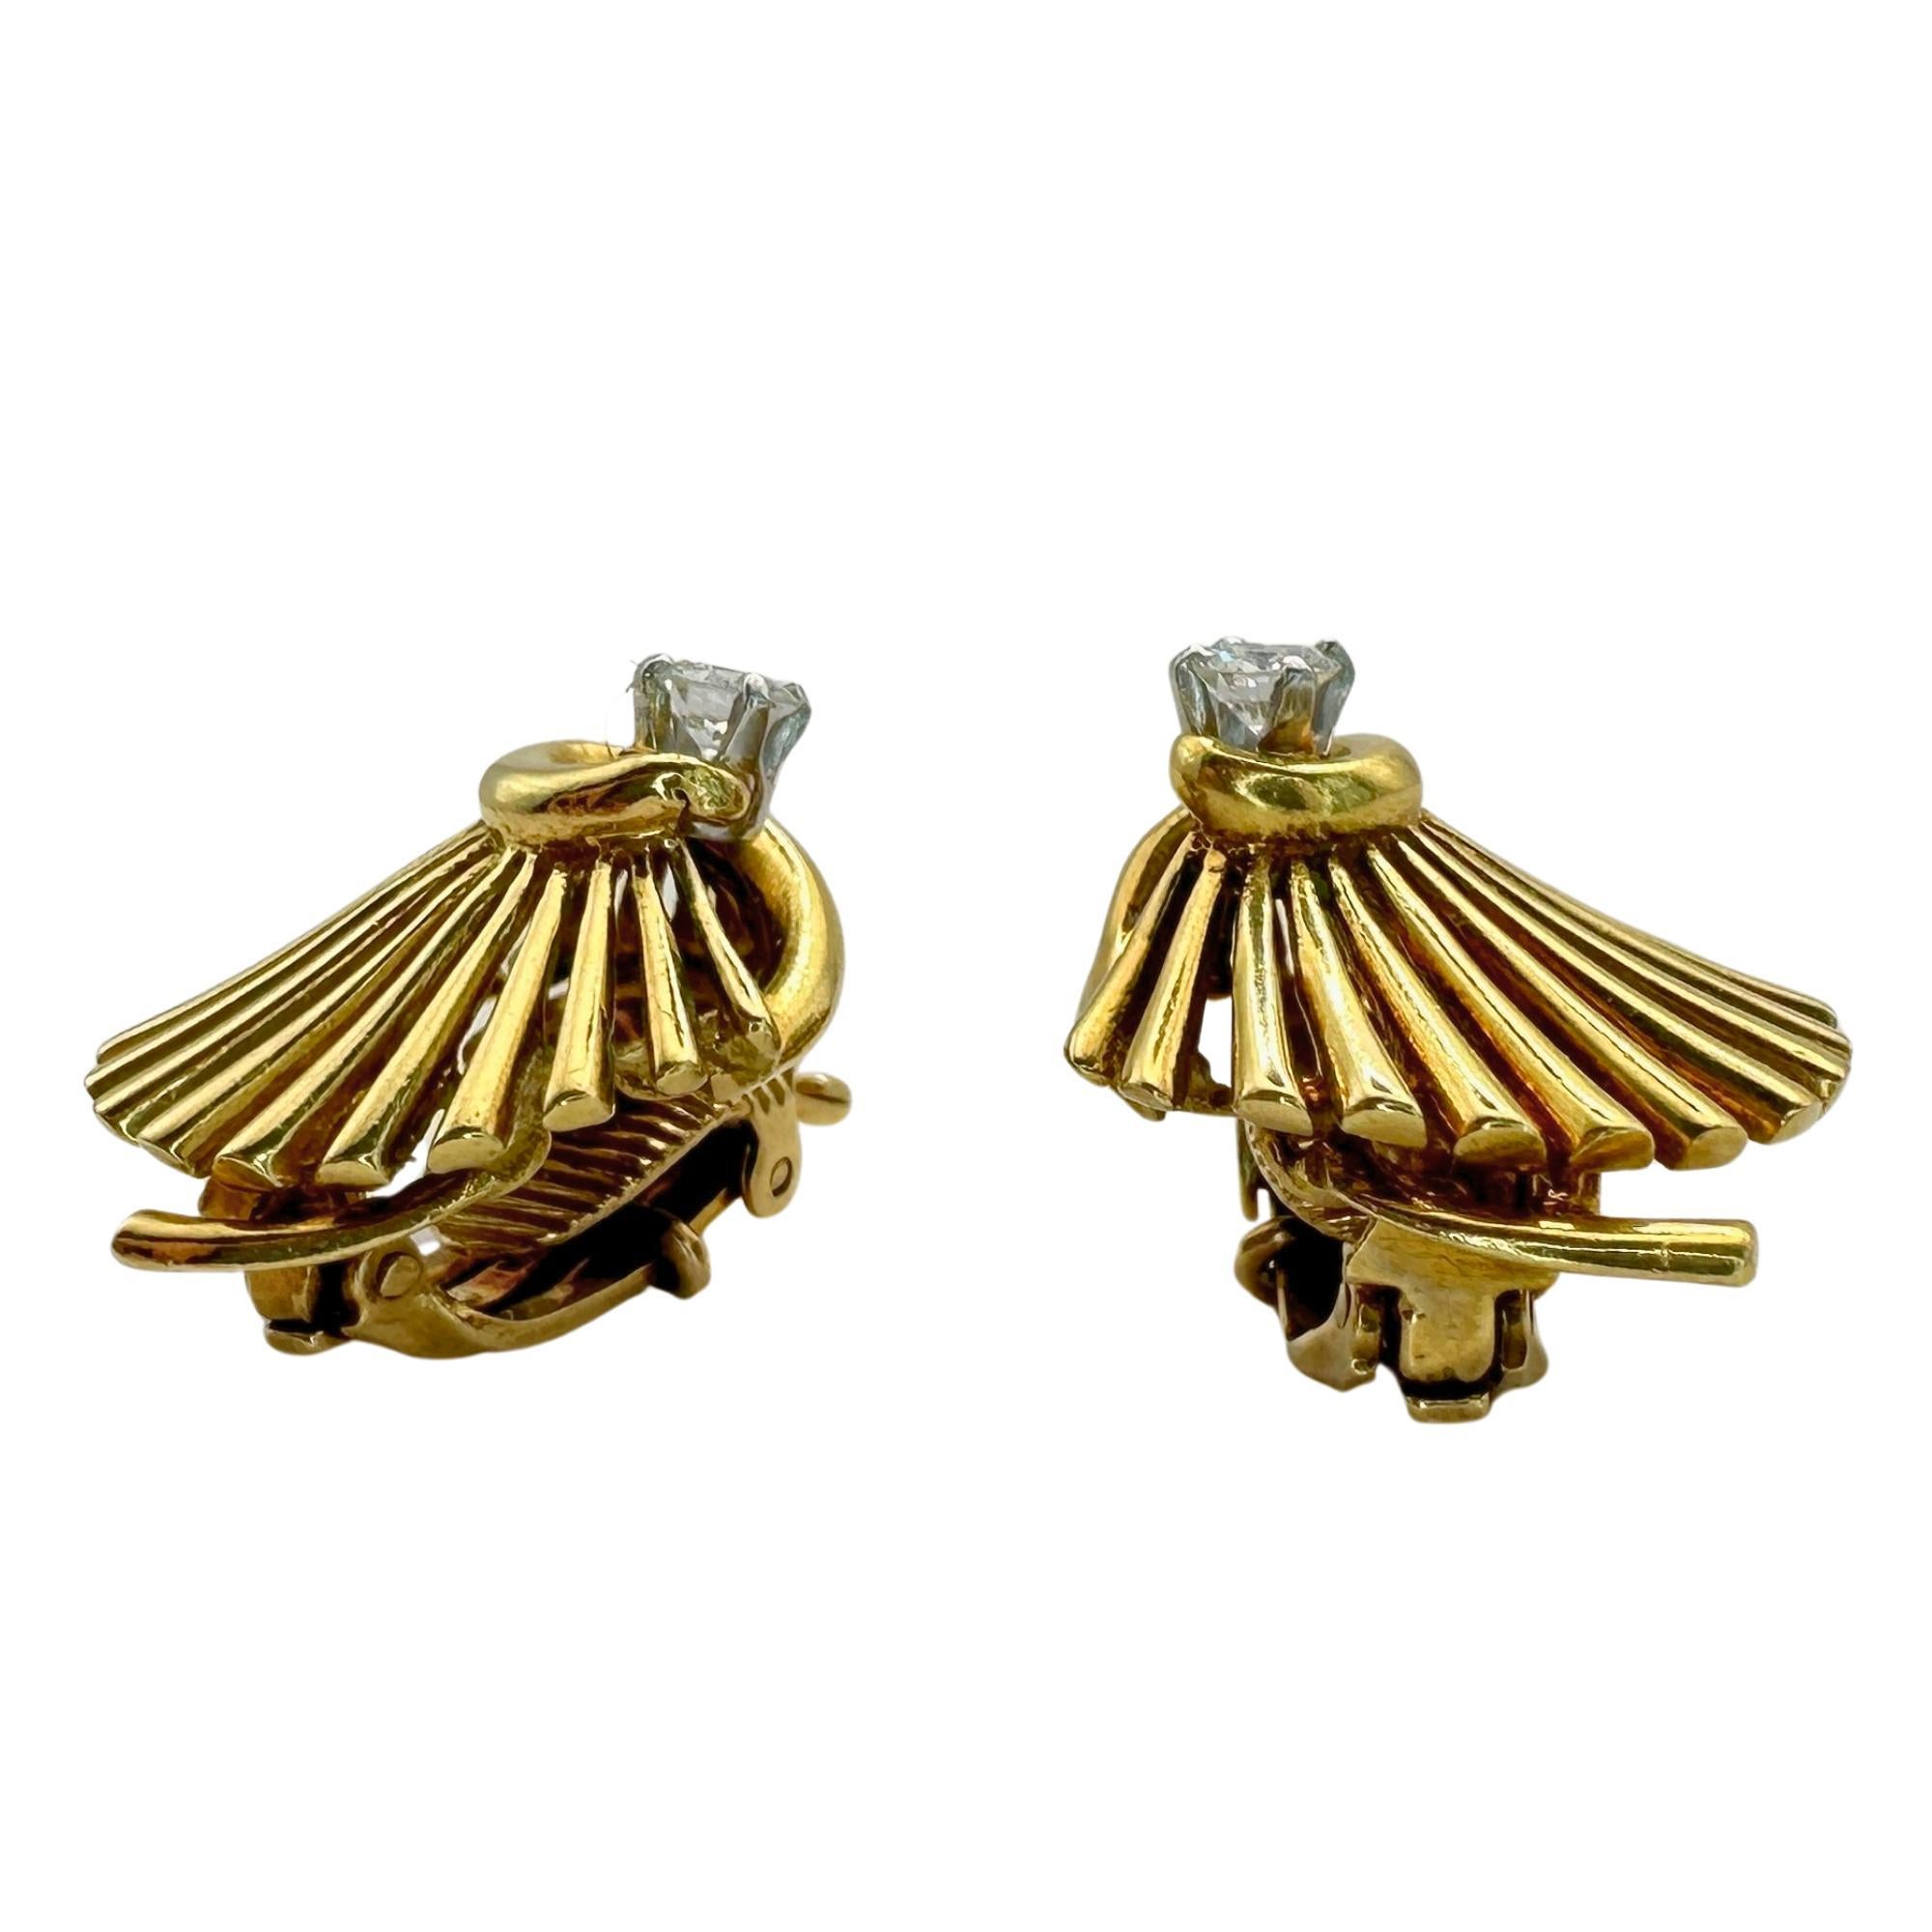 Make a statement with these stunning 18k Cartier Diamond Ear Clips from the 1940's. In excellent condition with minor surface wear, these clips add a touch of elegance to any outfit. Featuring 0.50 carats of sparkling diamonds and marked with the